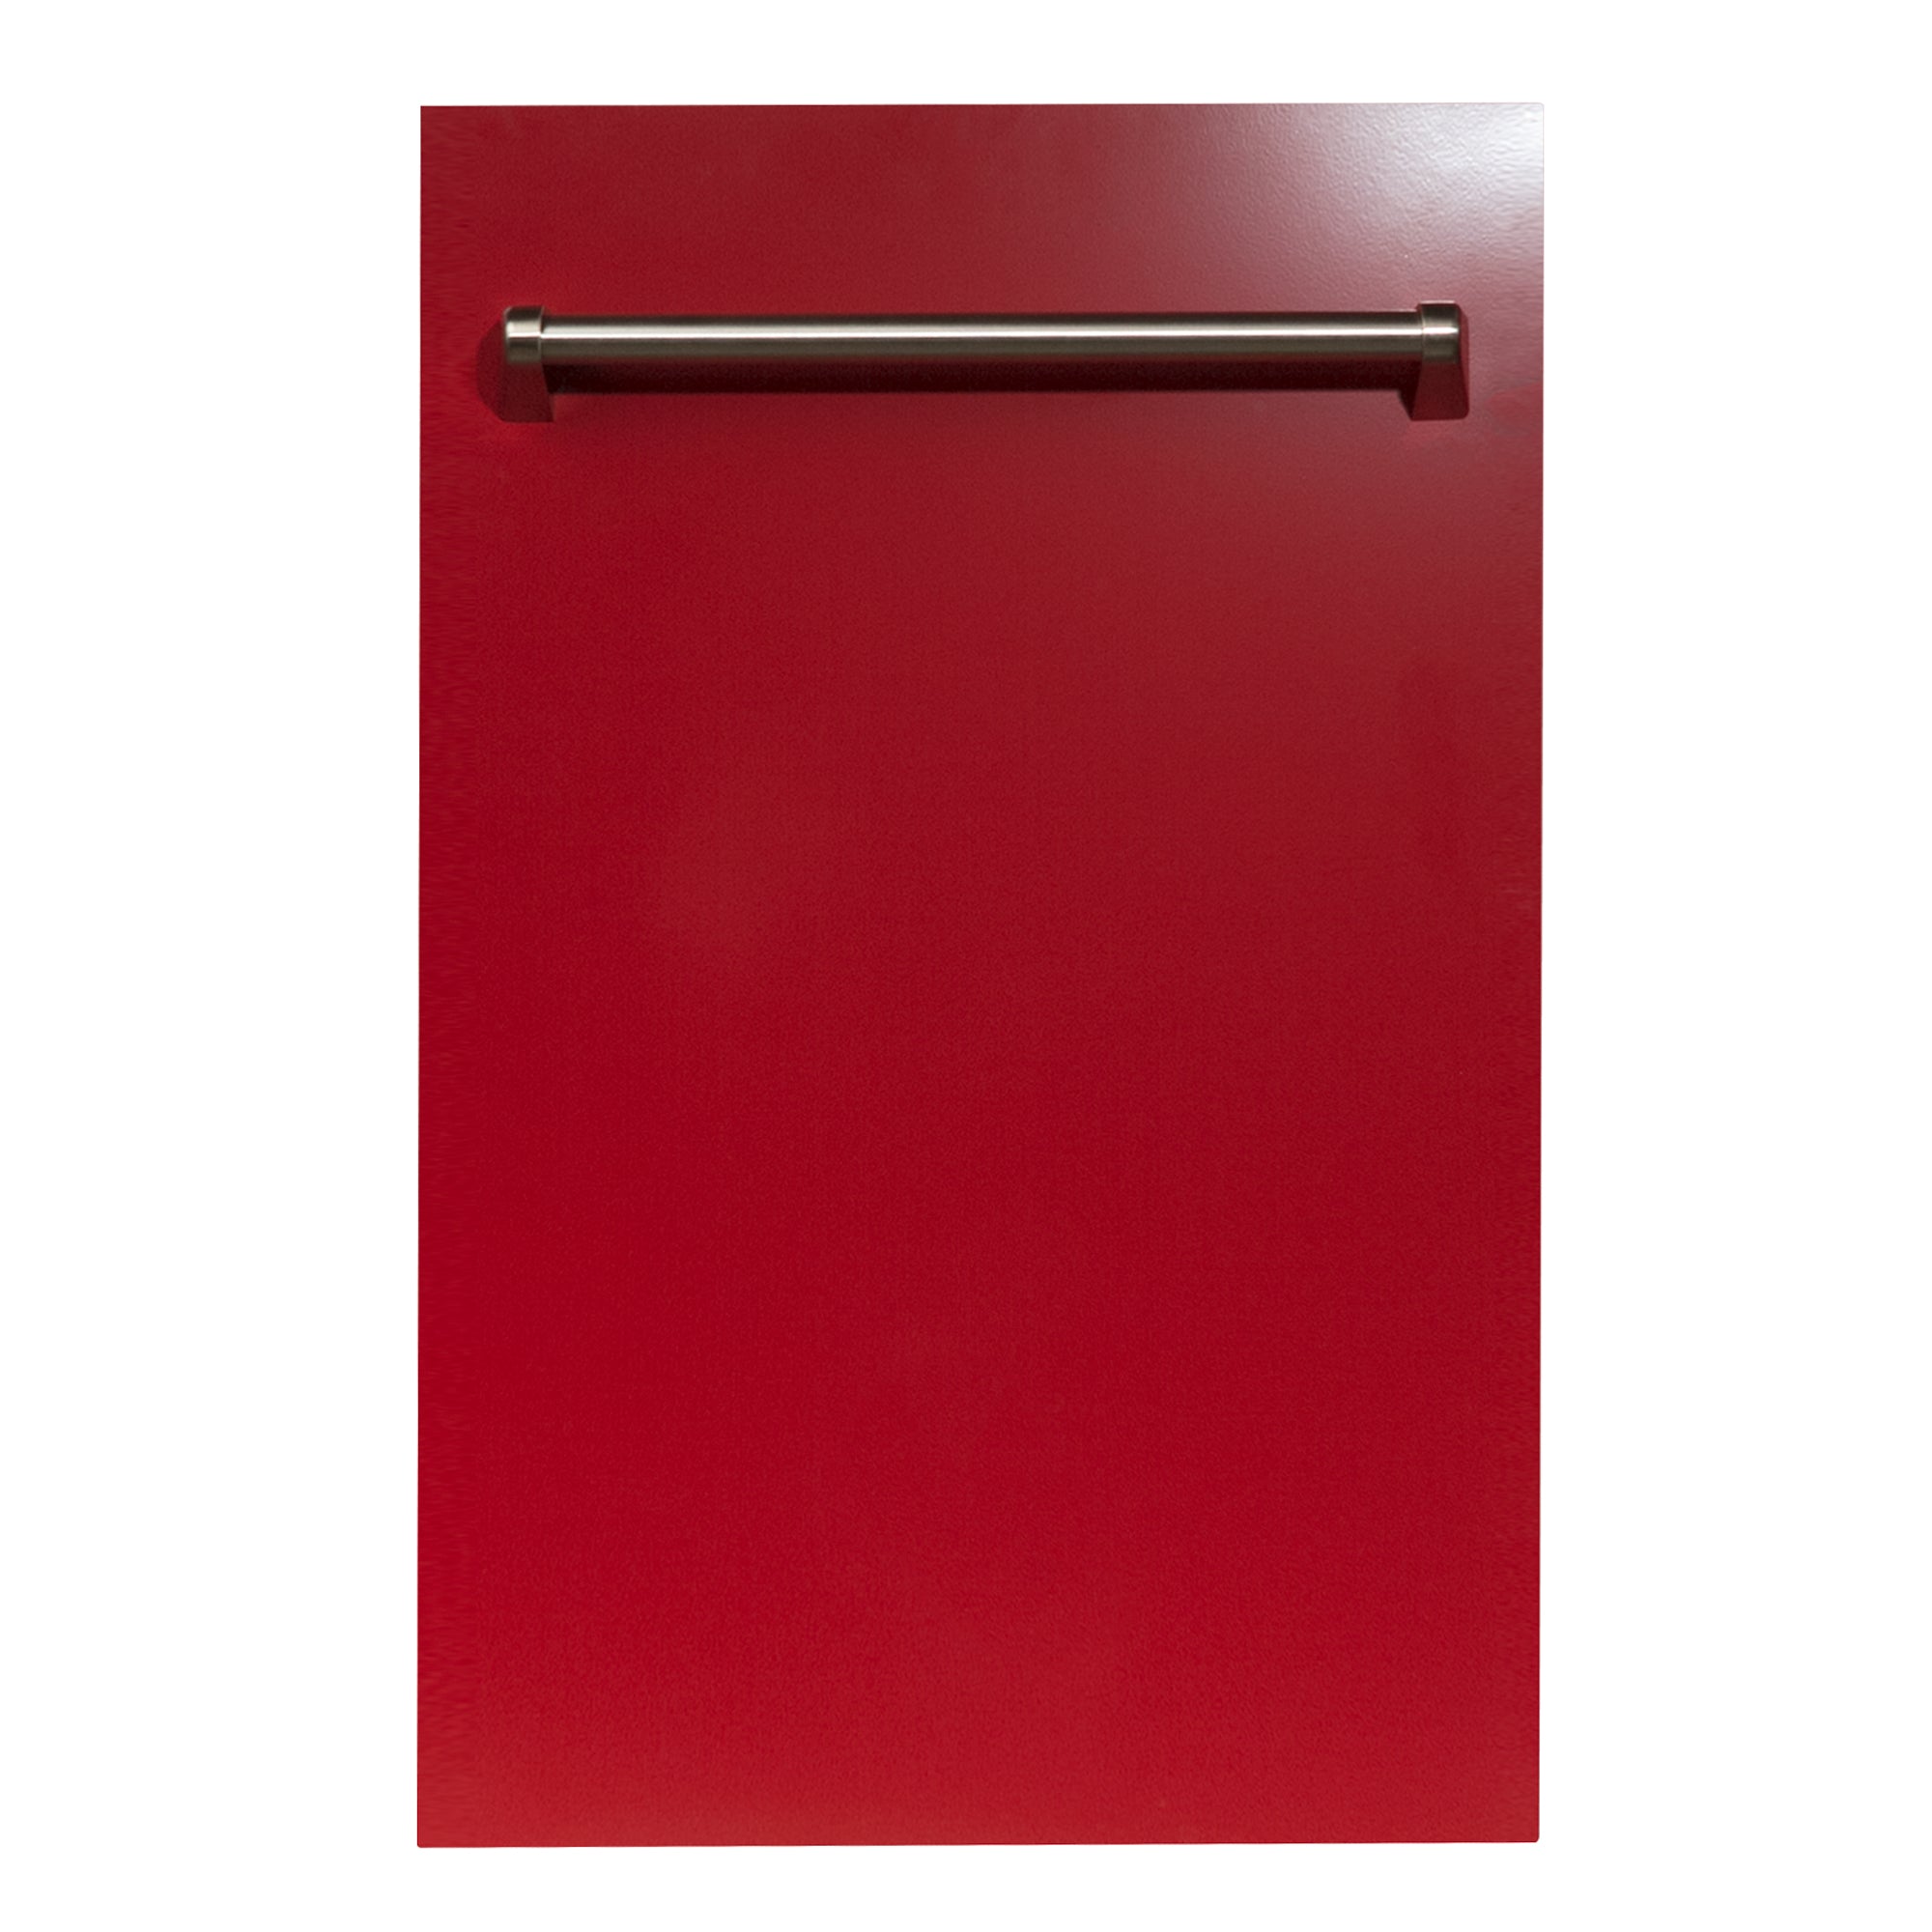 ZLINE 18" Dishwasher Panel in Red Gloss with Traditional Handle (DP-RG-18)